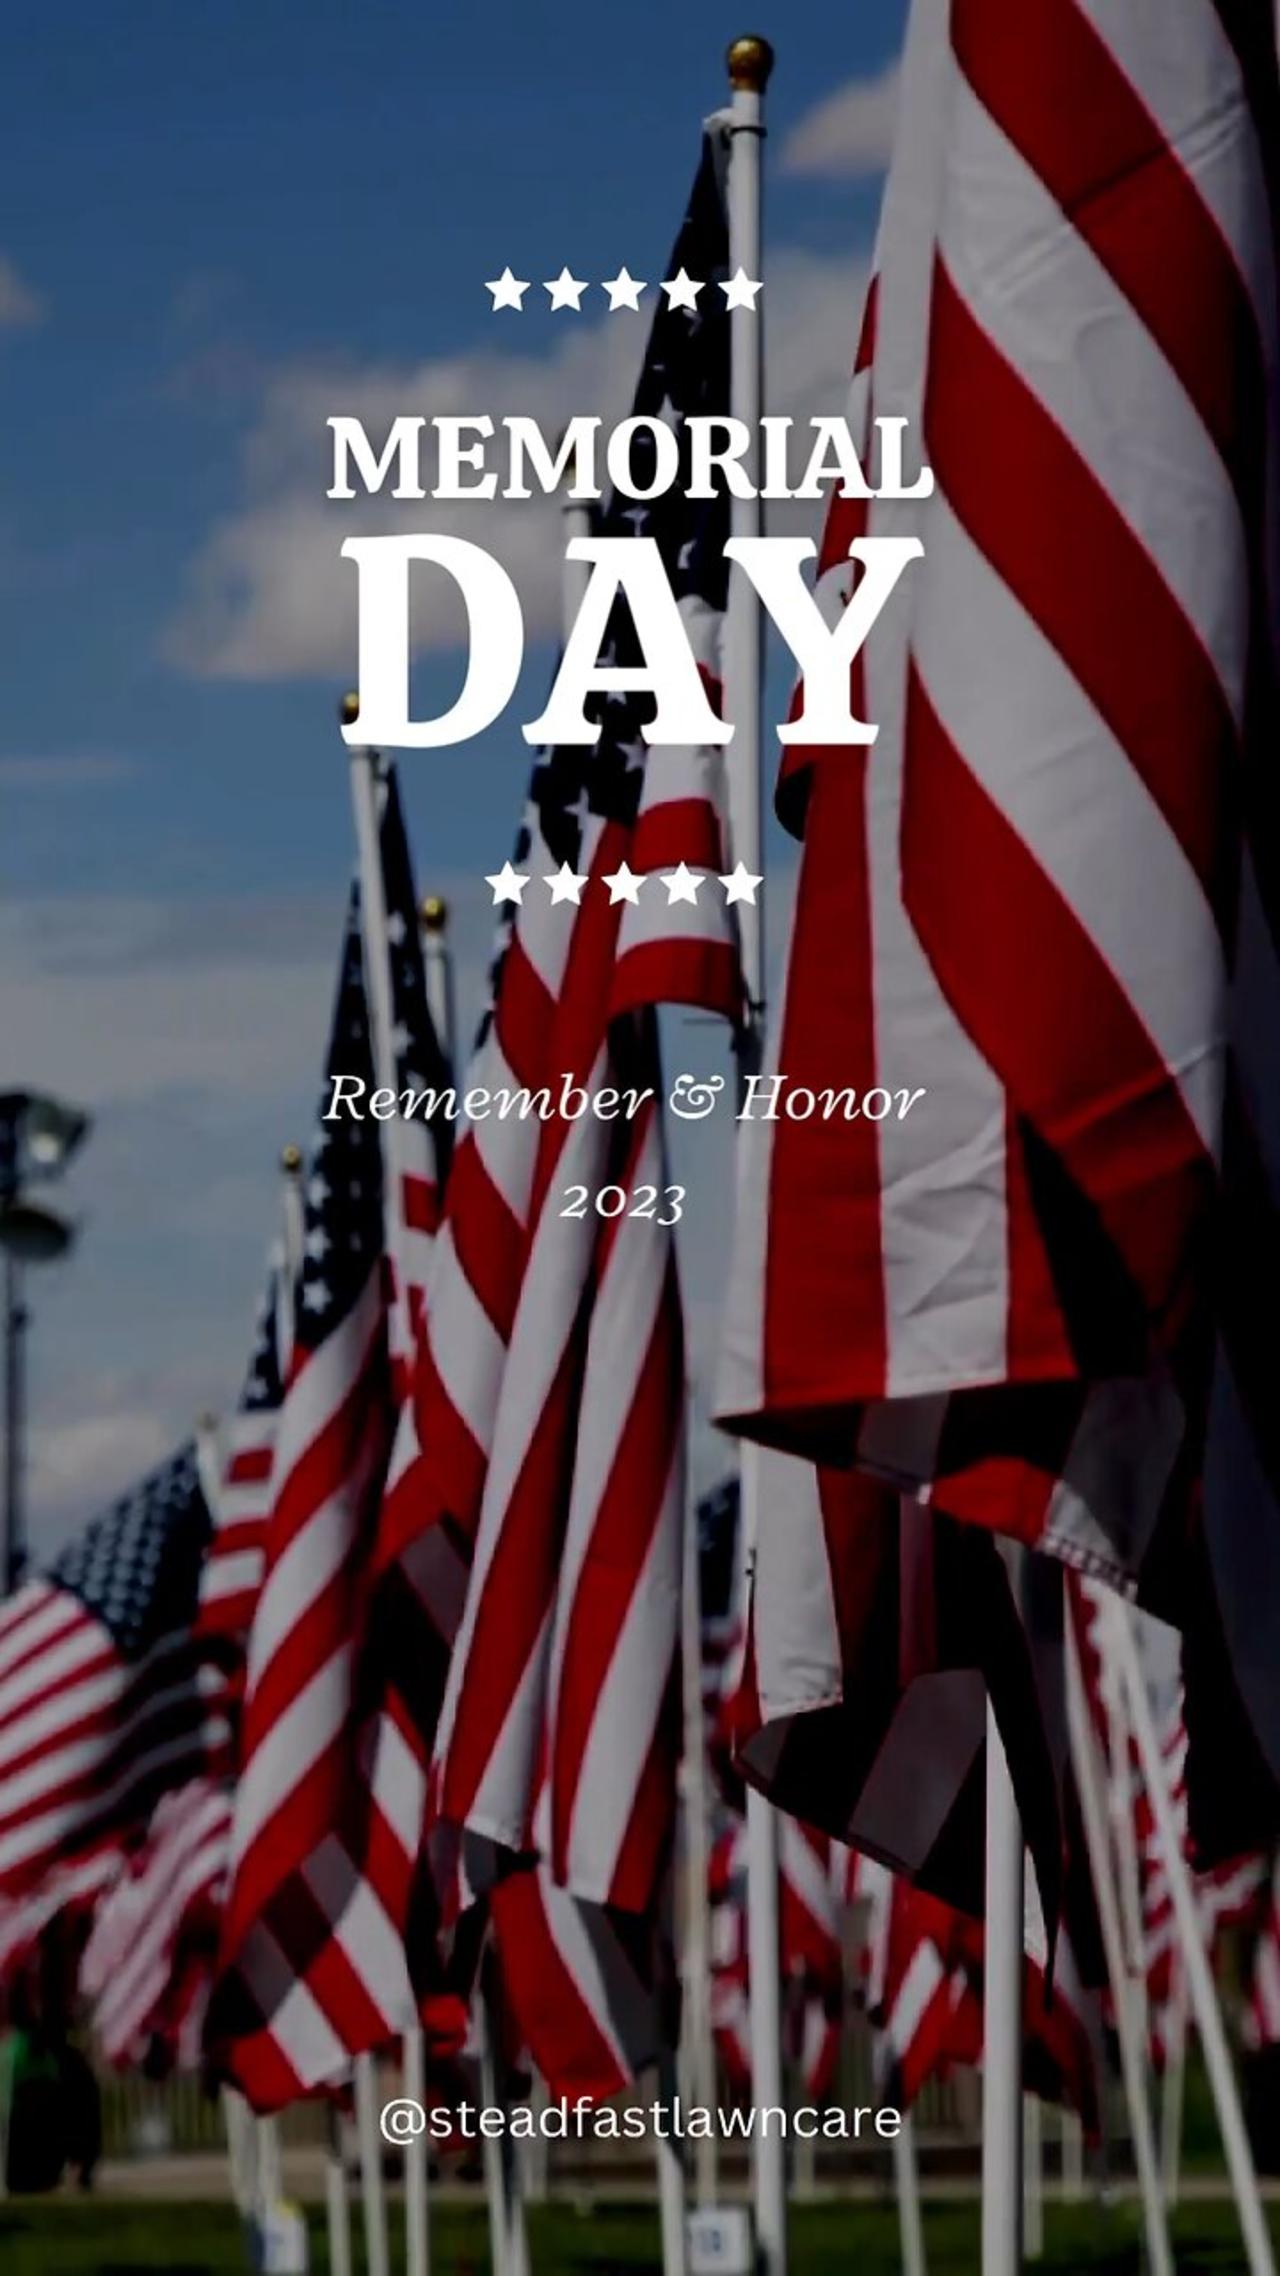 Memorial Day 2023 One News Page VIDEO